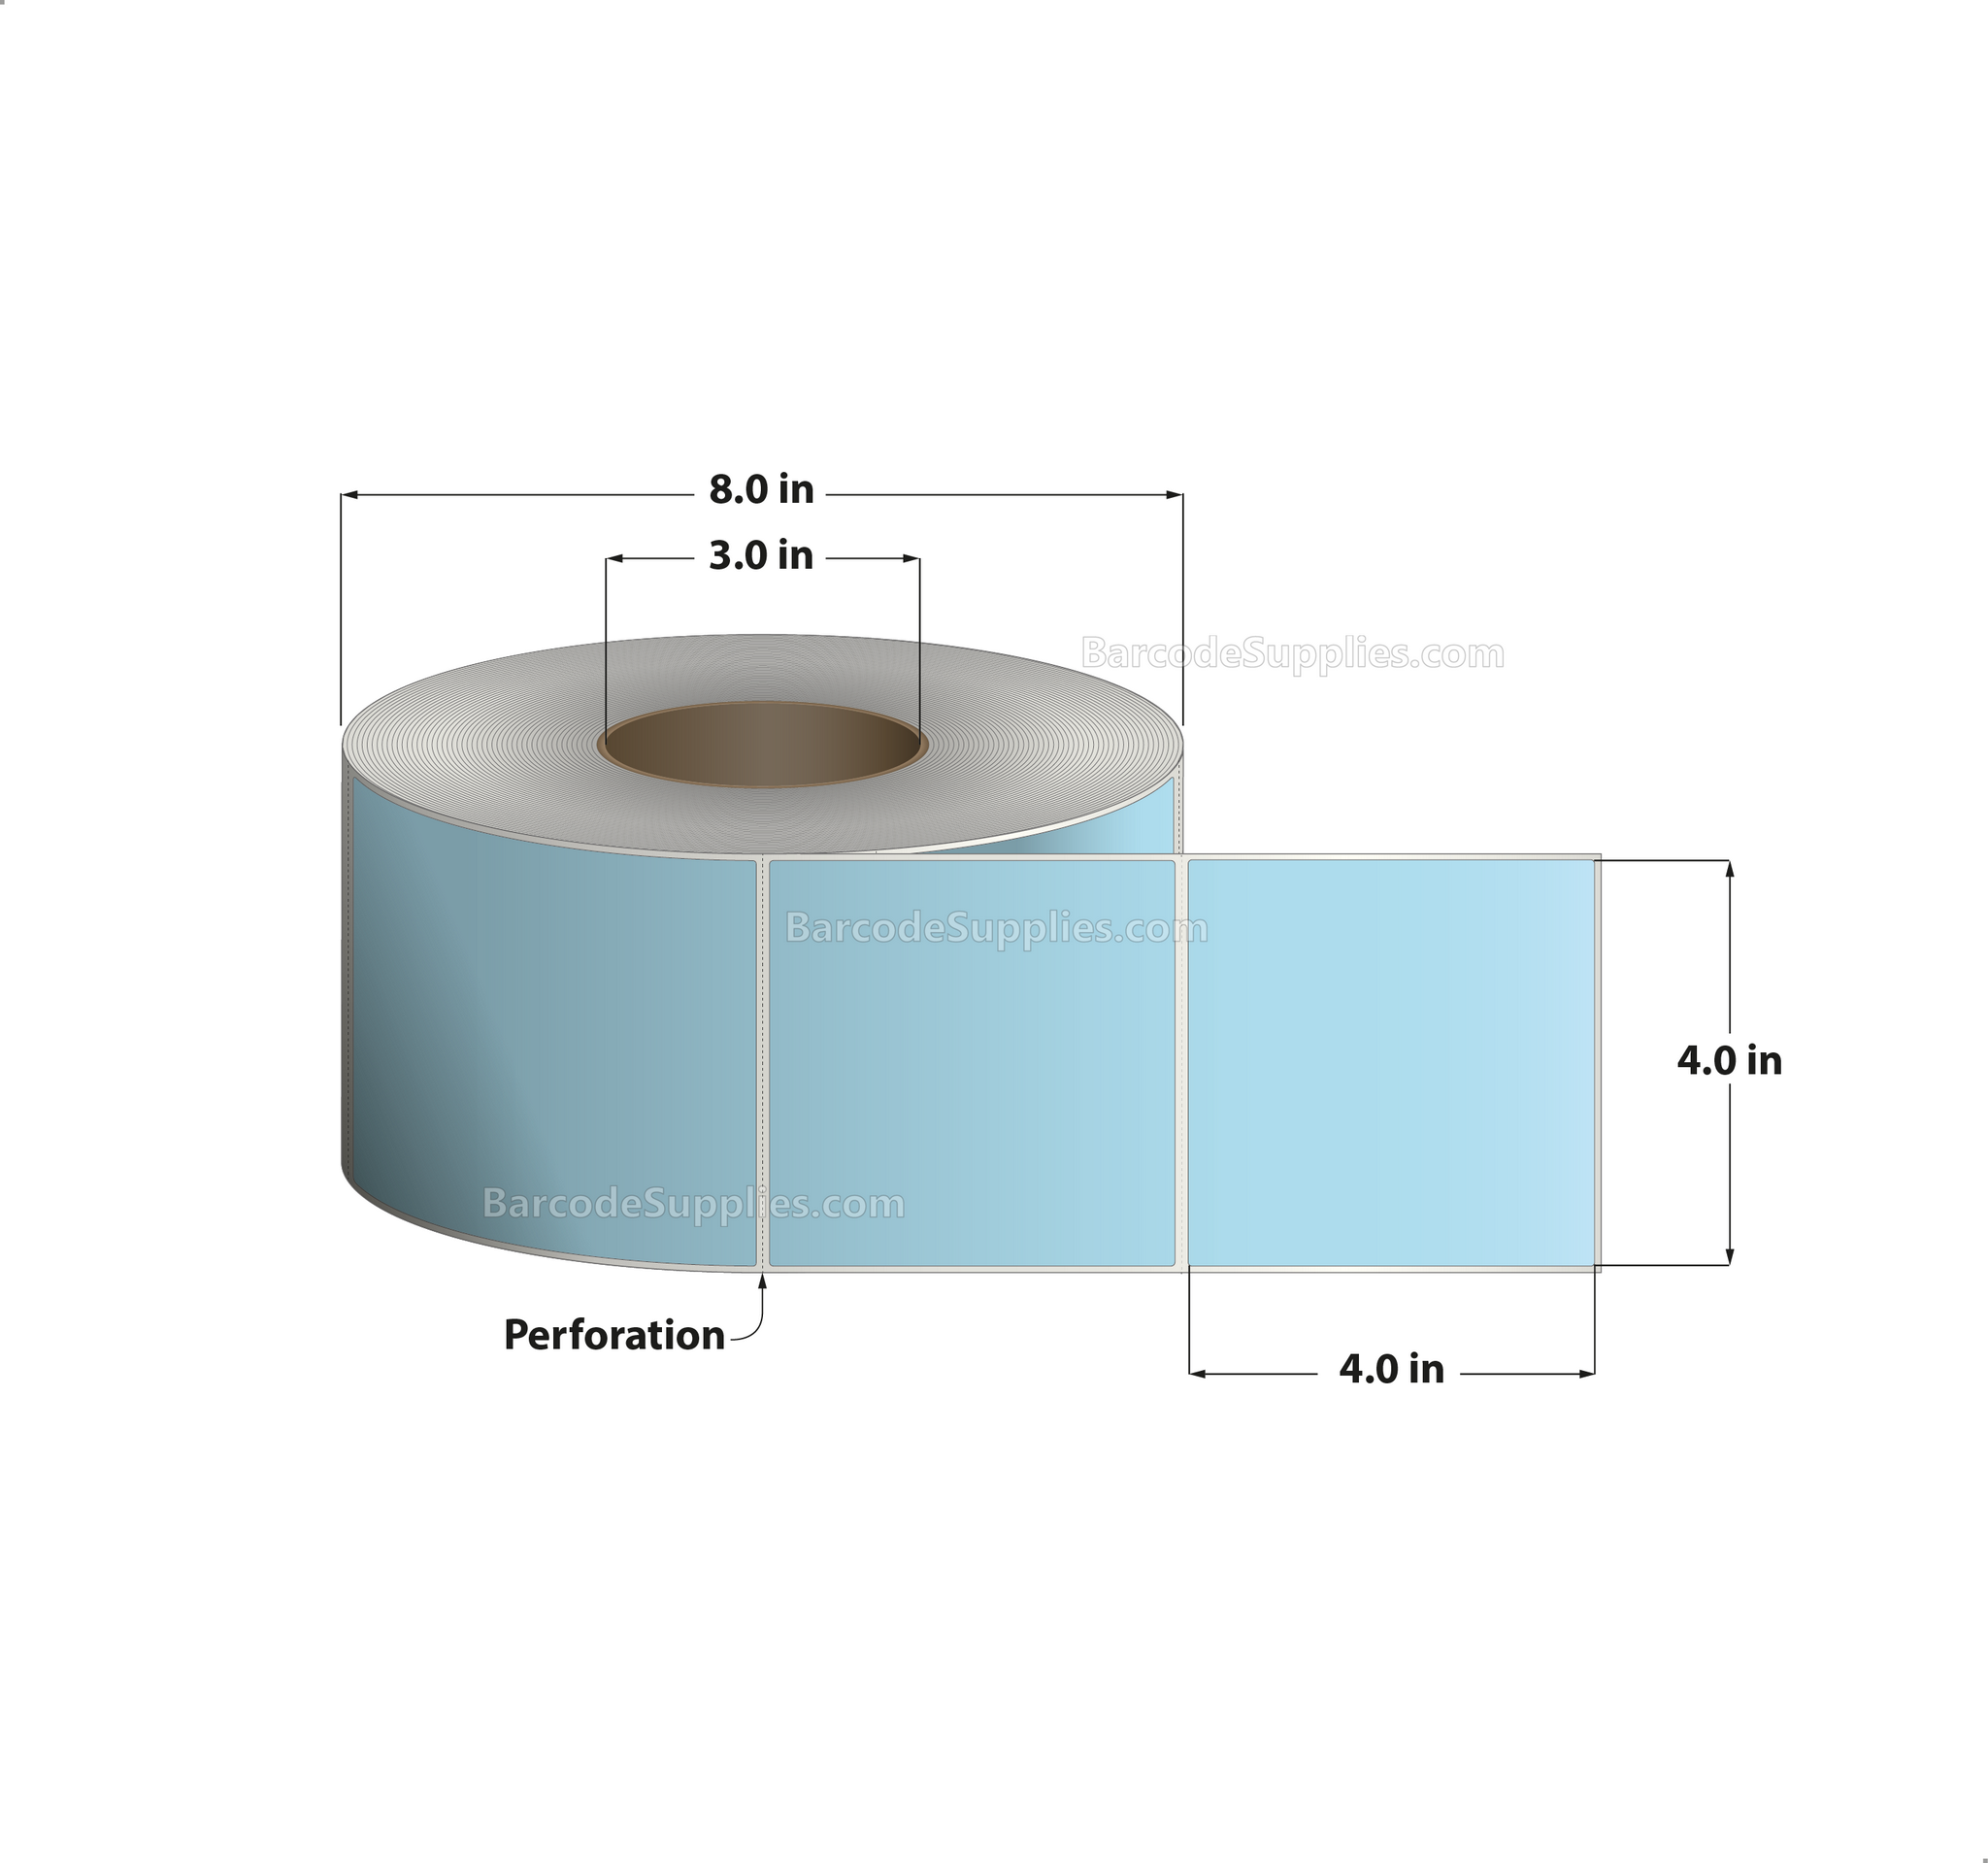 4 x 3 Thermal Transfer 2975 Blue Labels With Permanent Acrylic Adhesive - Perforated - 1900 Labels Per Roll - Carton Of 4 Rolls - 7600 Labels Total - MPN: TH43-1PBL